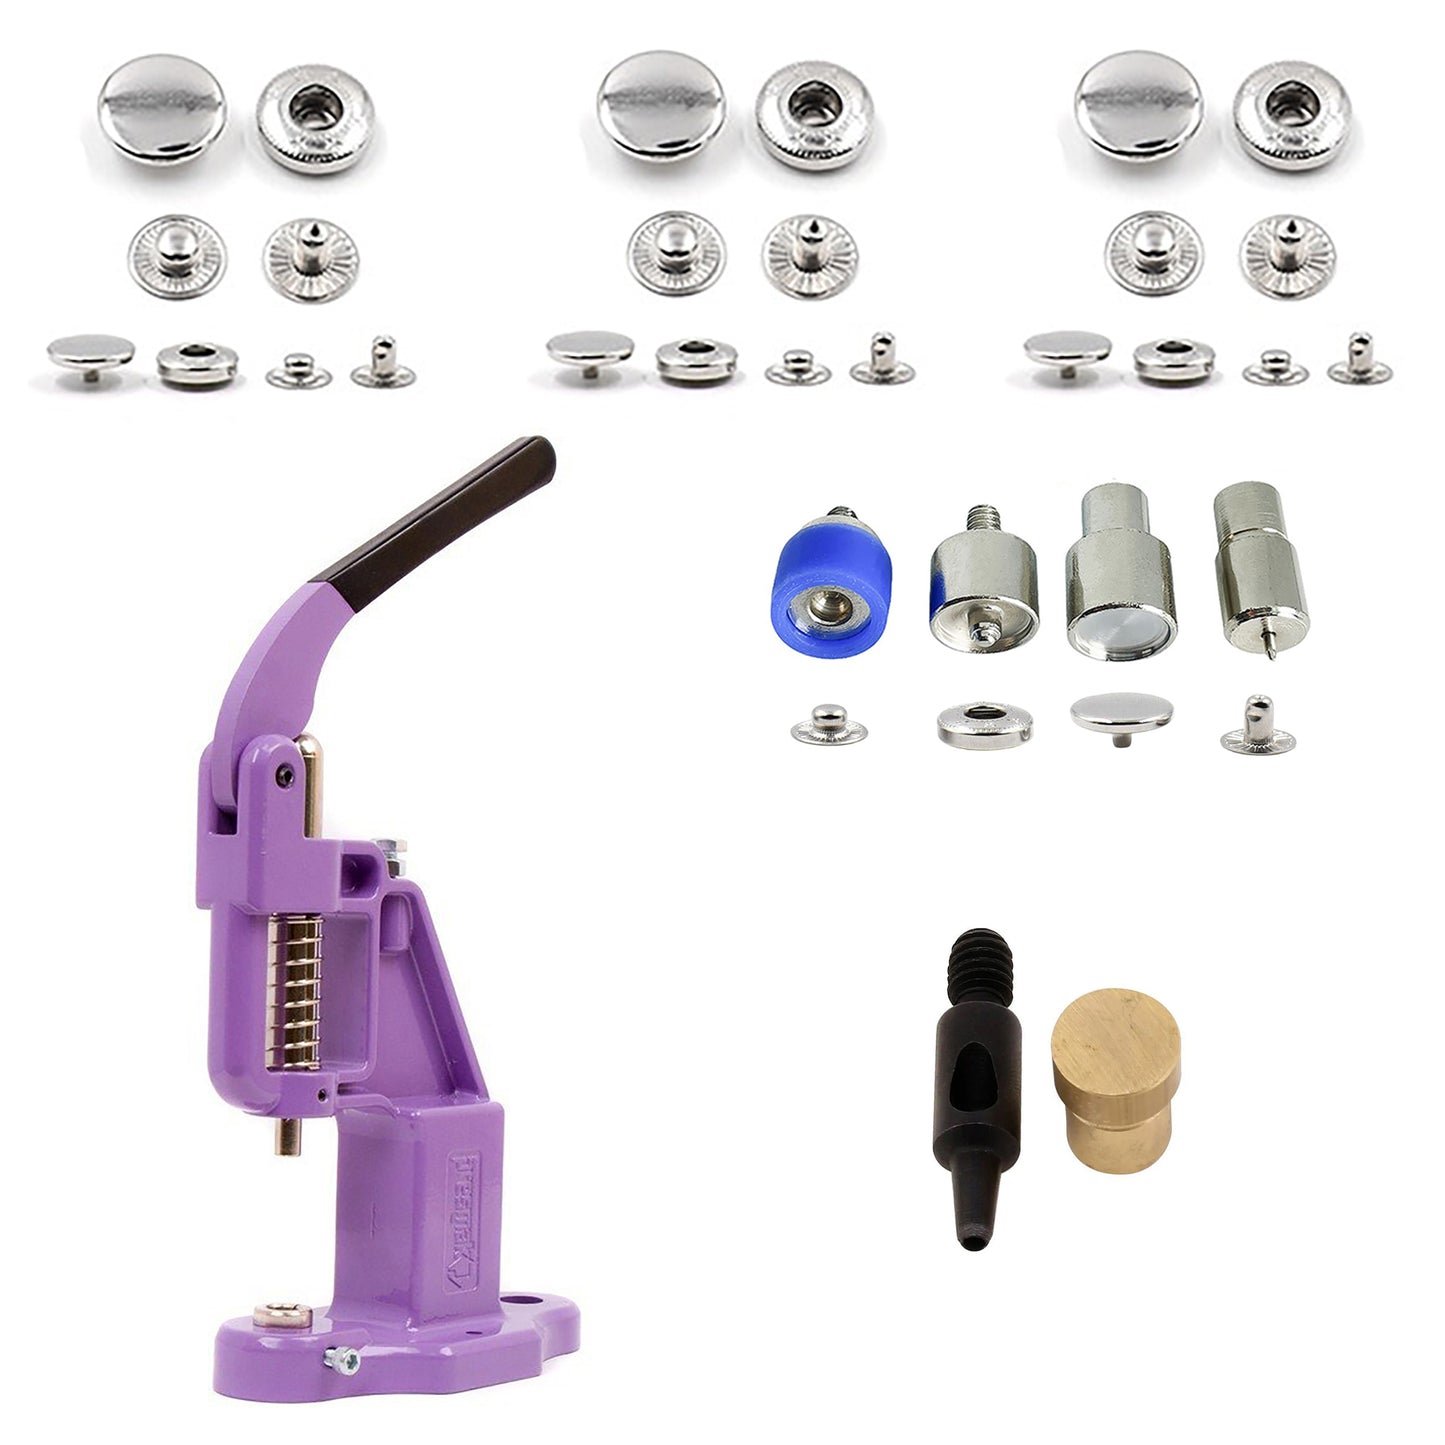 HOBBY TRENDY Hand Press with 15mm (ln24) 300 Sets of Stainless Steel Fashion Spring Snap Buttons with Dies and Hole Punch